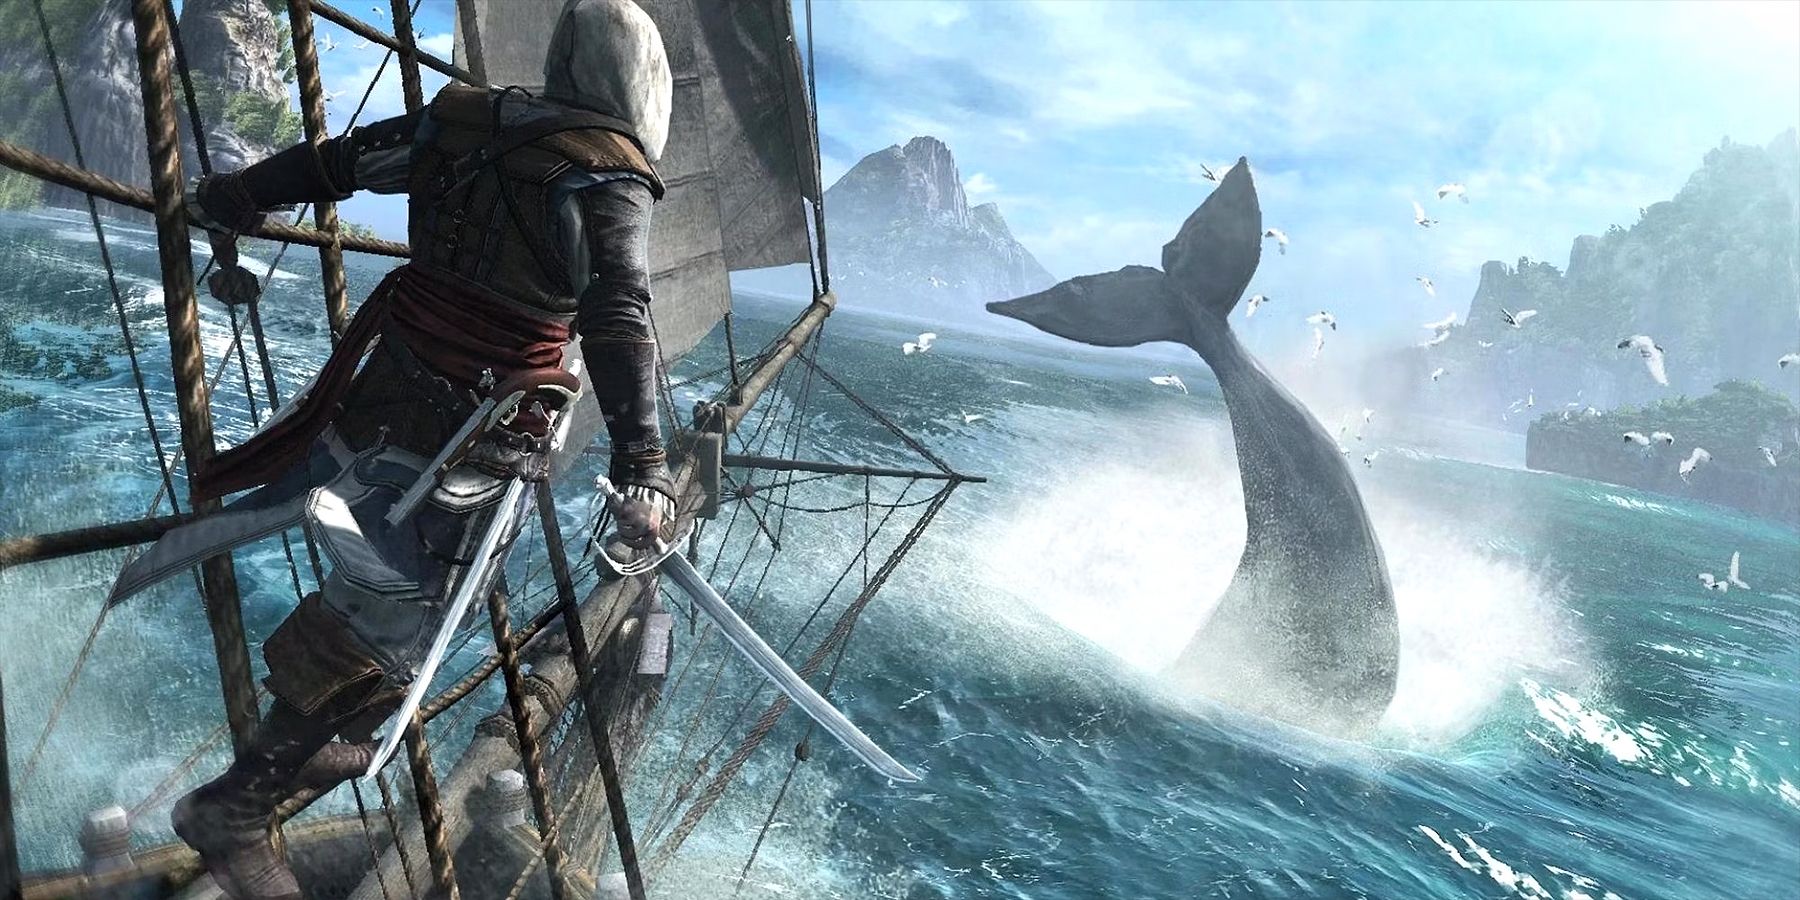 Edward Kenway watching a whale in Assassin's Creed 4 Black Flag